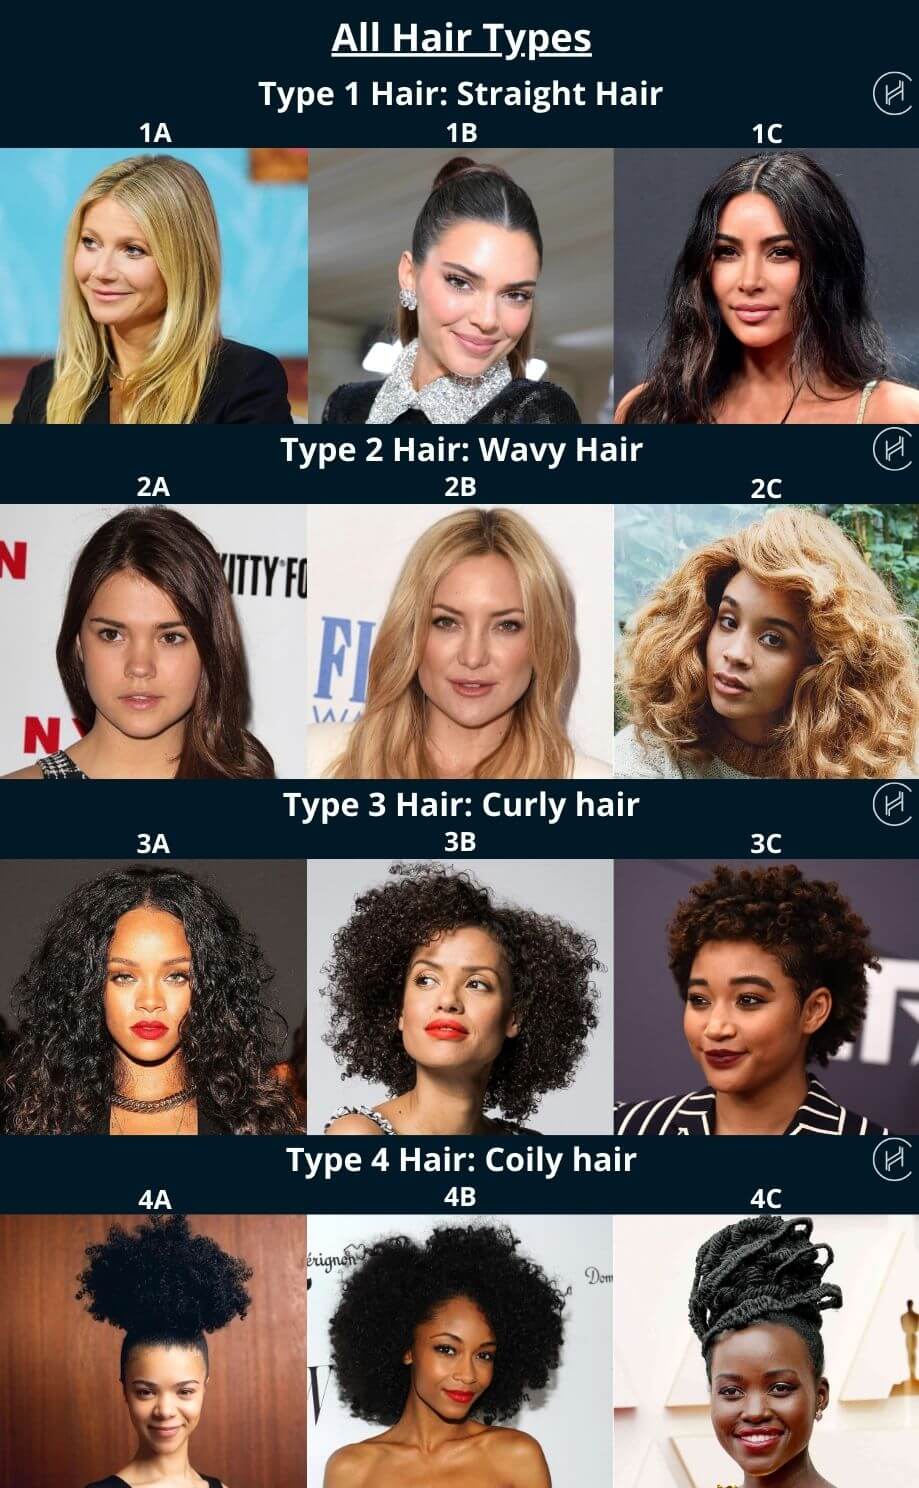 all hair types - different hair types 1-2-3-4